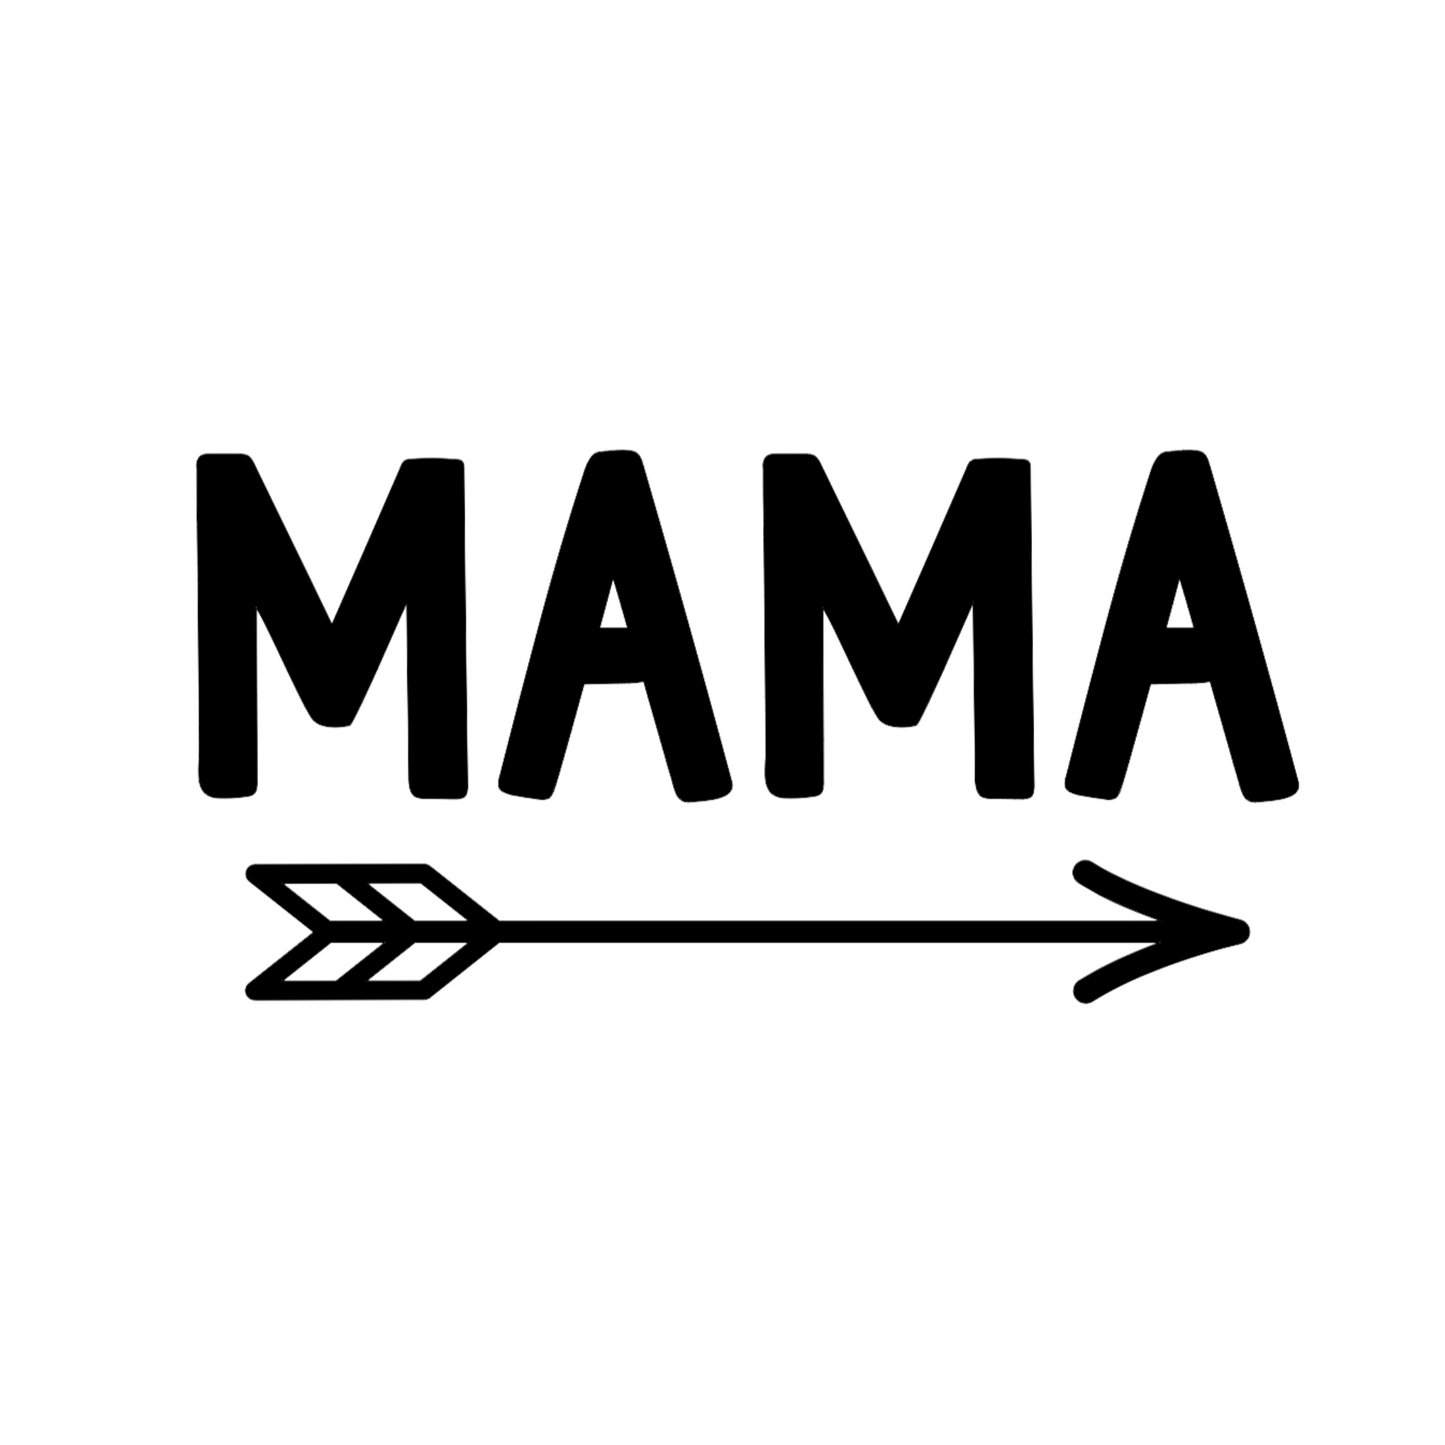 Mama Long Sleeve Shirt in blue with black design on the front with big bold writing "Mama" with an arrow underneath pointing right. This is an image of the design on black on a white background